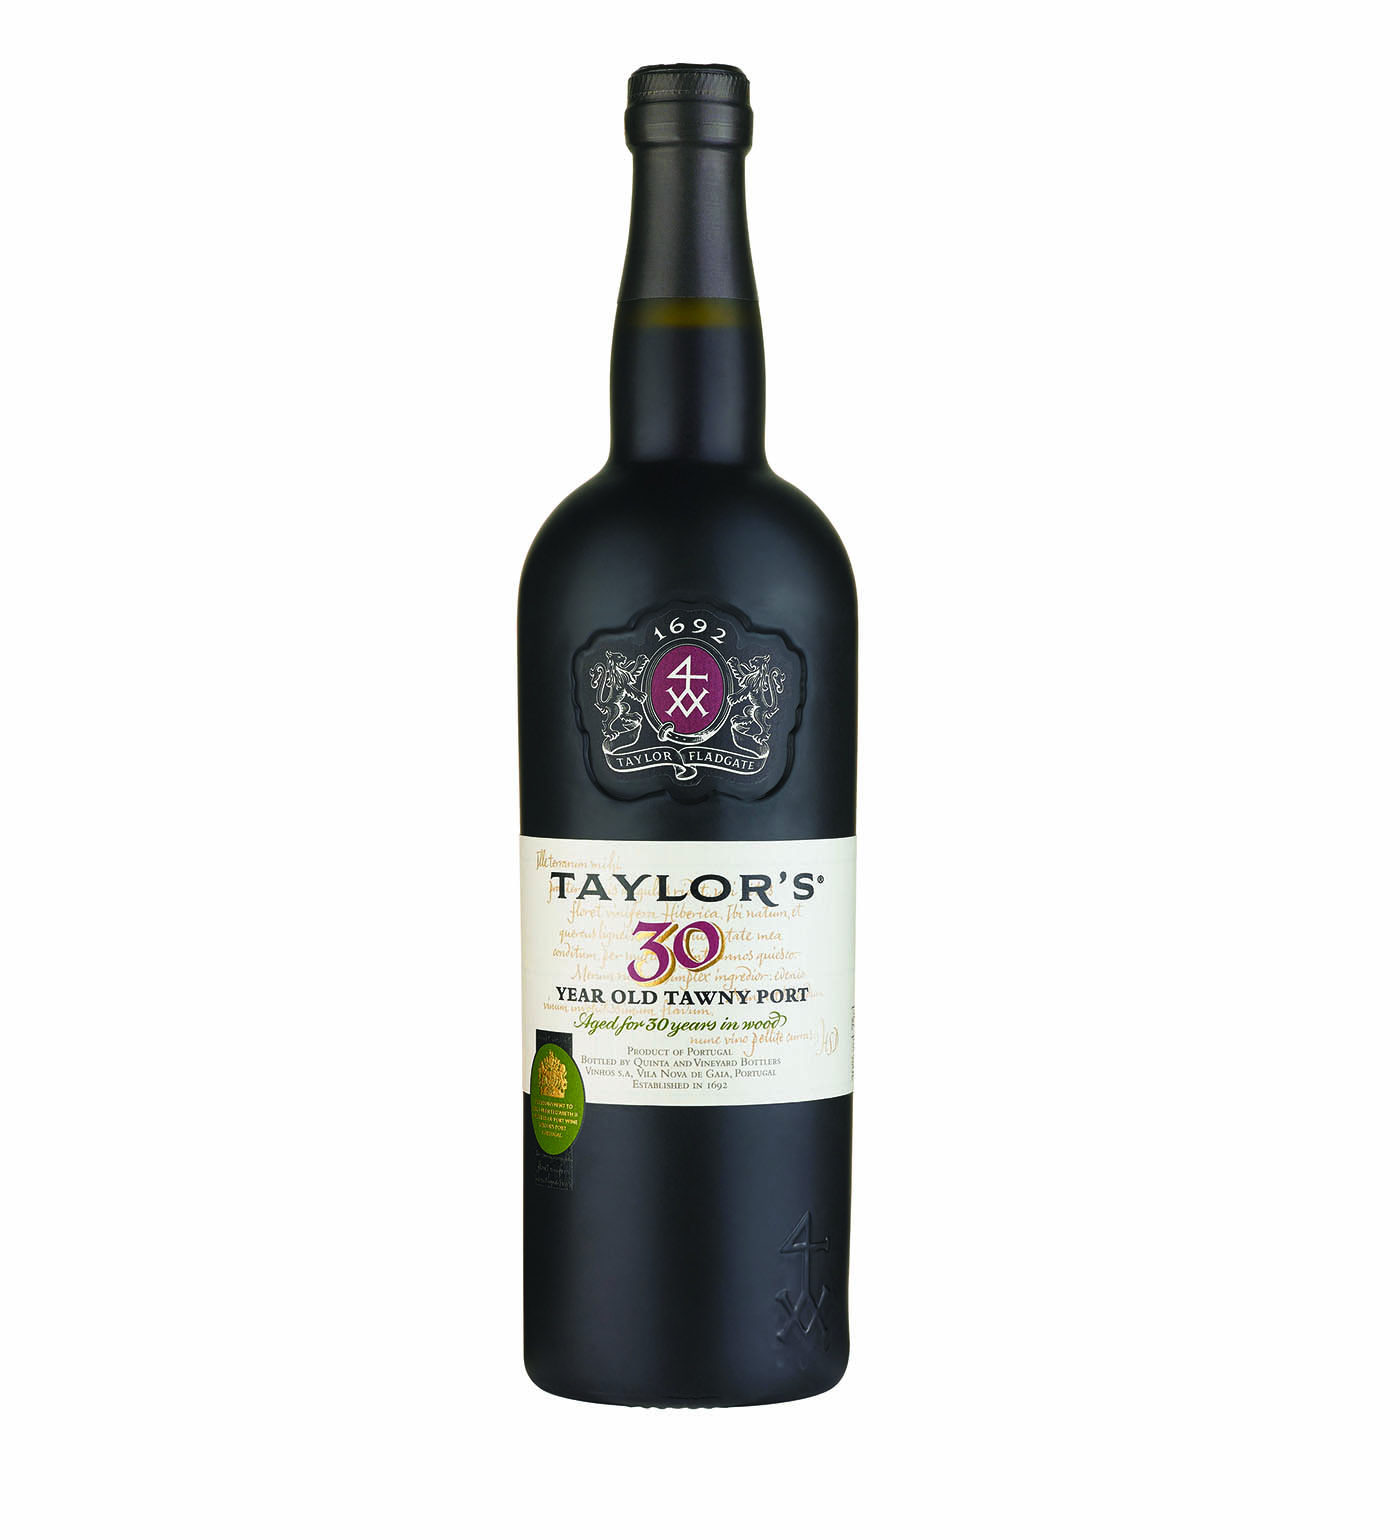 Taylor's Port 30 year old Tawny 325th Luxury box